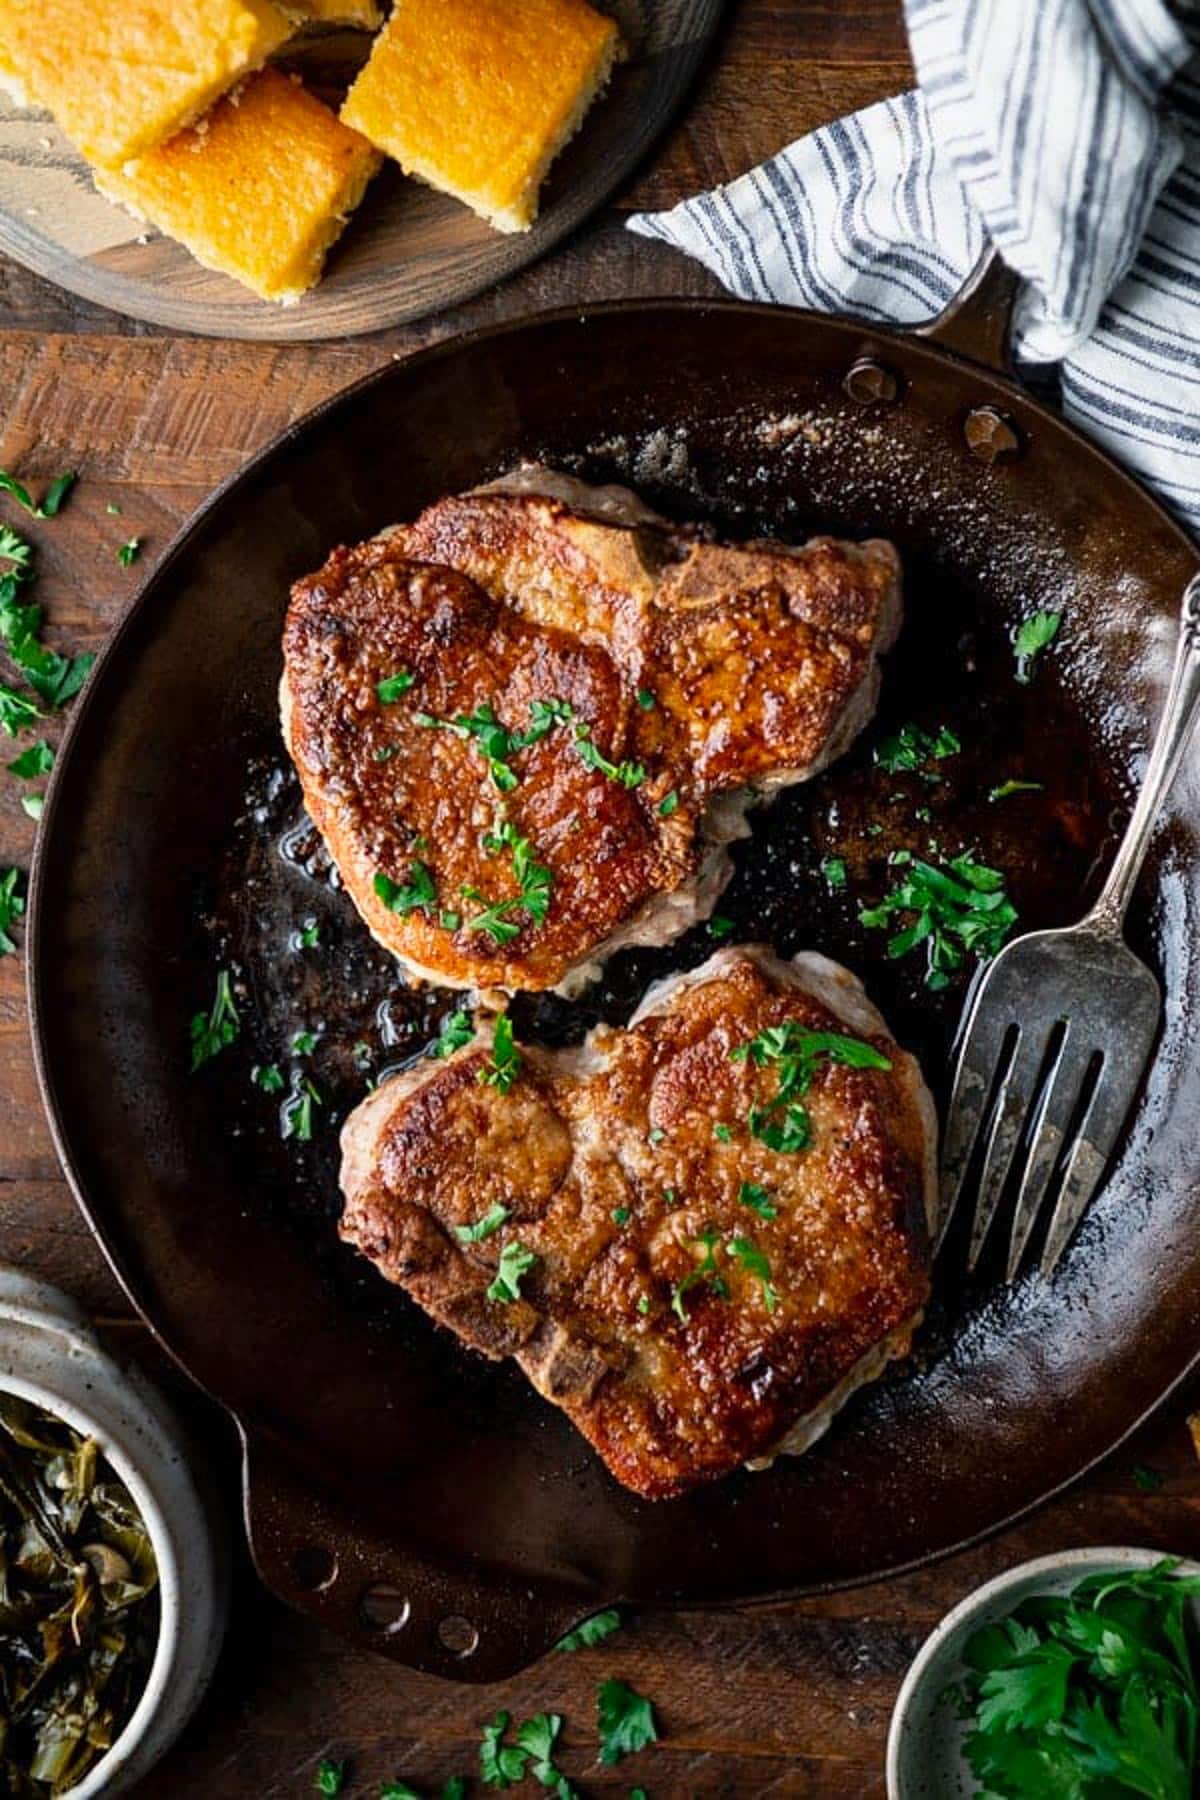 Overhead image of thick and juicy pan fried pork chops with parsley garnish.